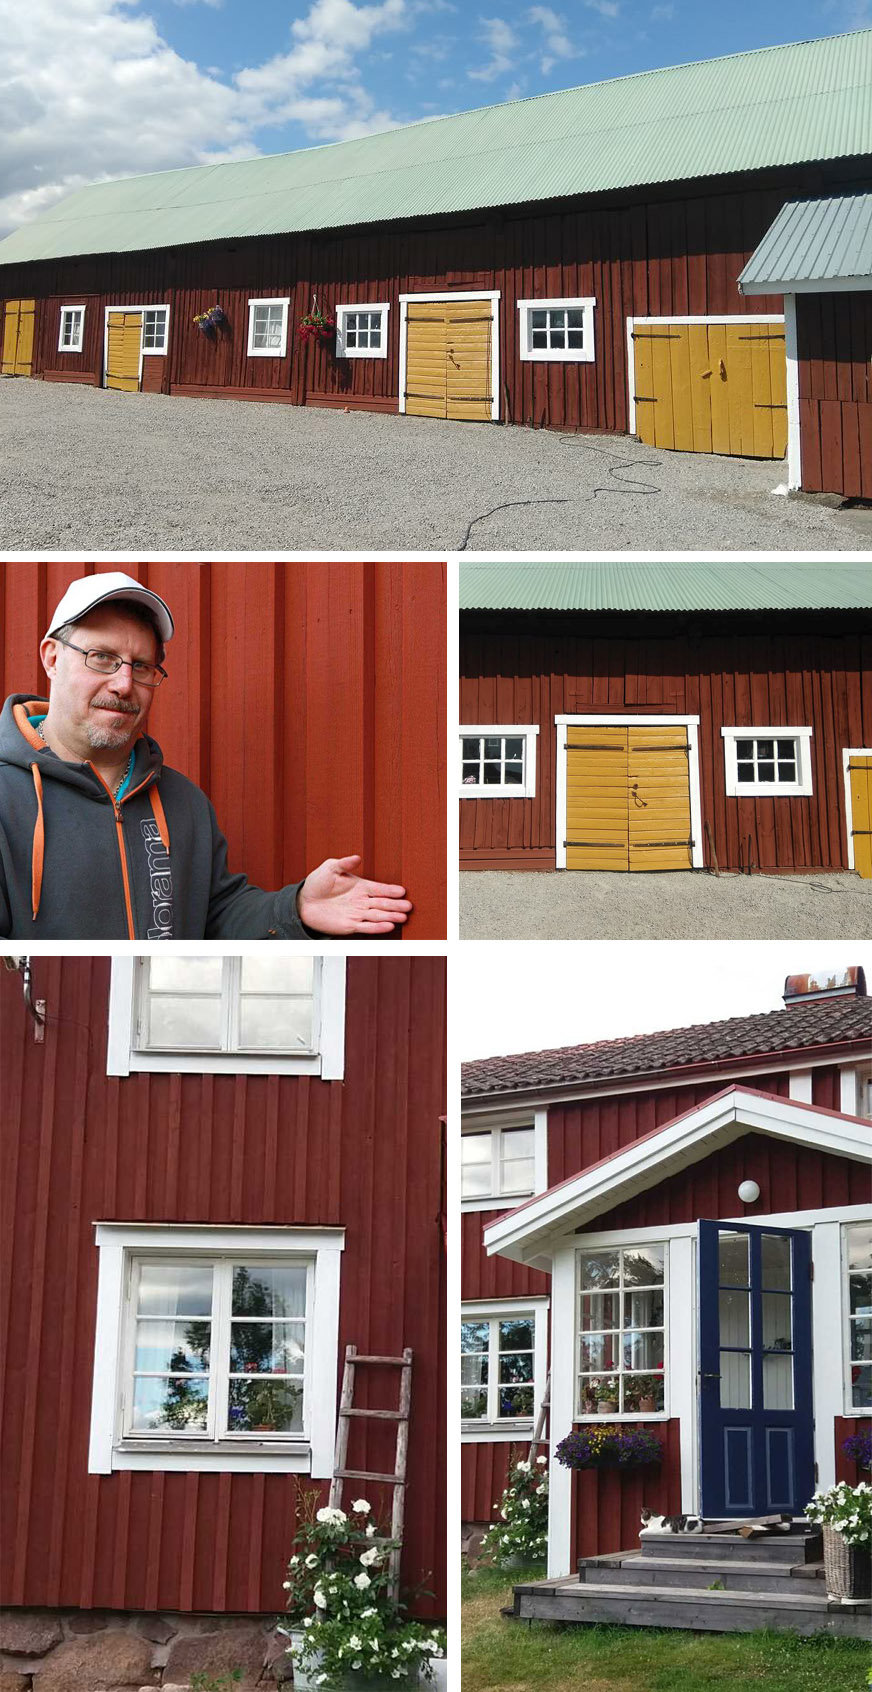 Paint: Classic exterior paint used for centuries Scandinavia